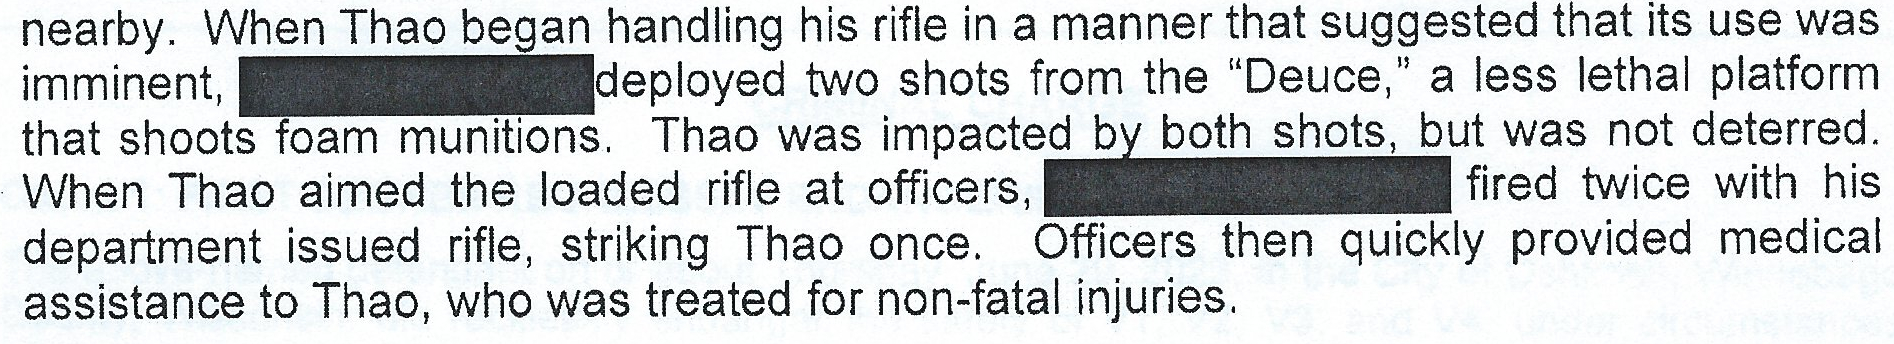 Oshkosh police shot and wounded a suicidal man with a hunting rifle at a public dock. The officers who used force had their names withheld in charging documents and redacted from the district attorney’s legal memo that justified their actions.